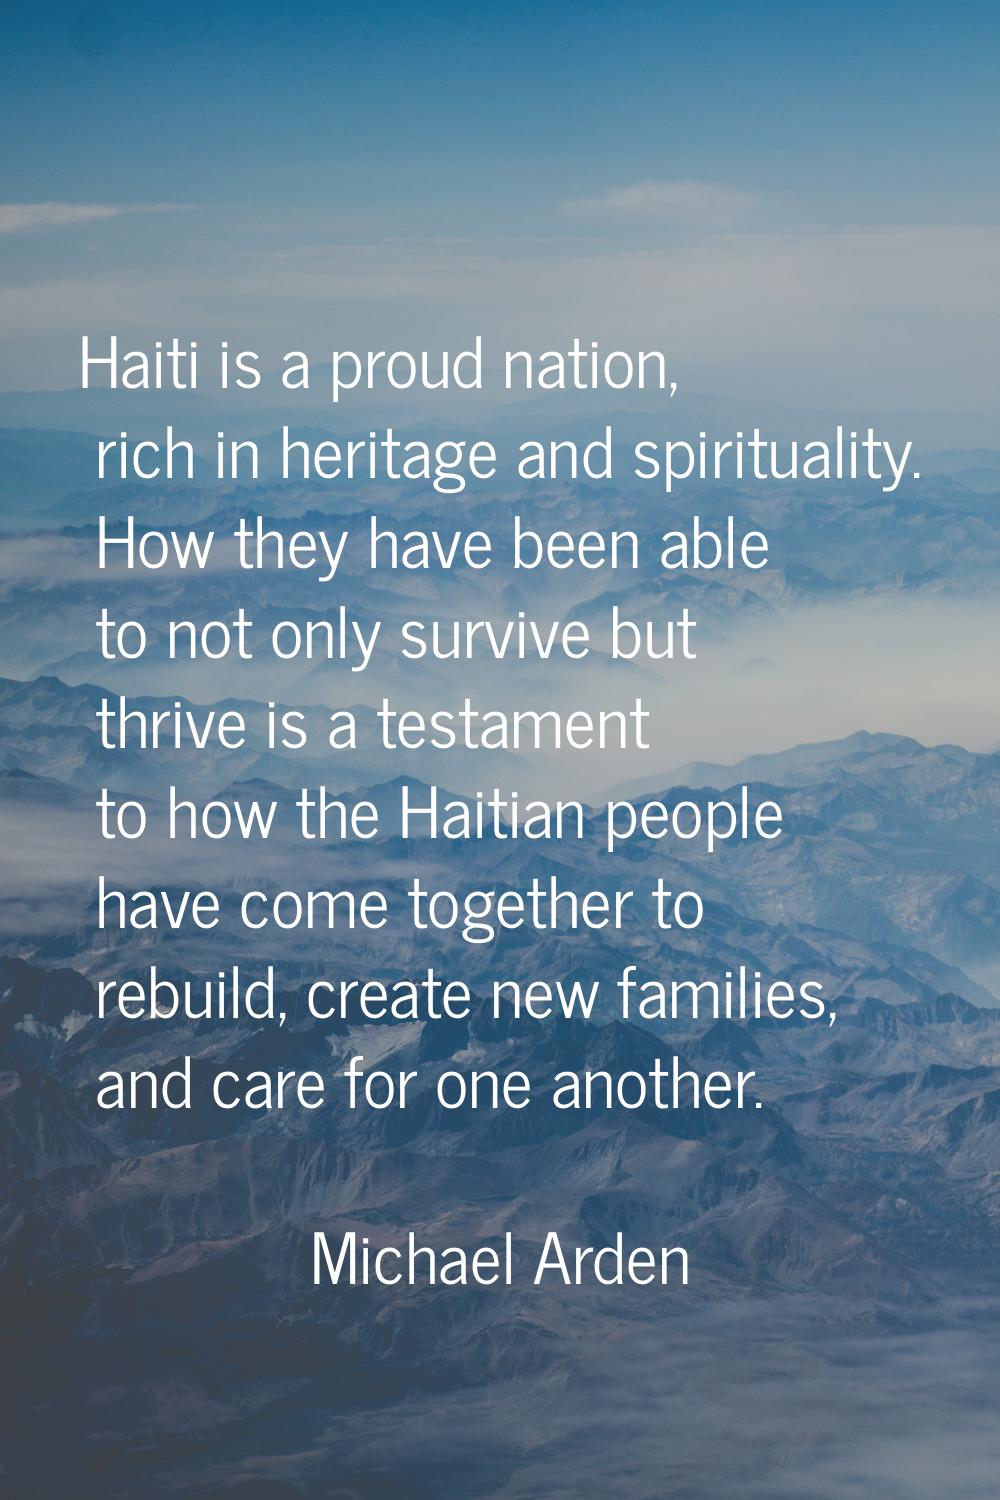 Haiti is a proud nation, rich in heritage and spirituality. How they have been able to not only sur